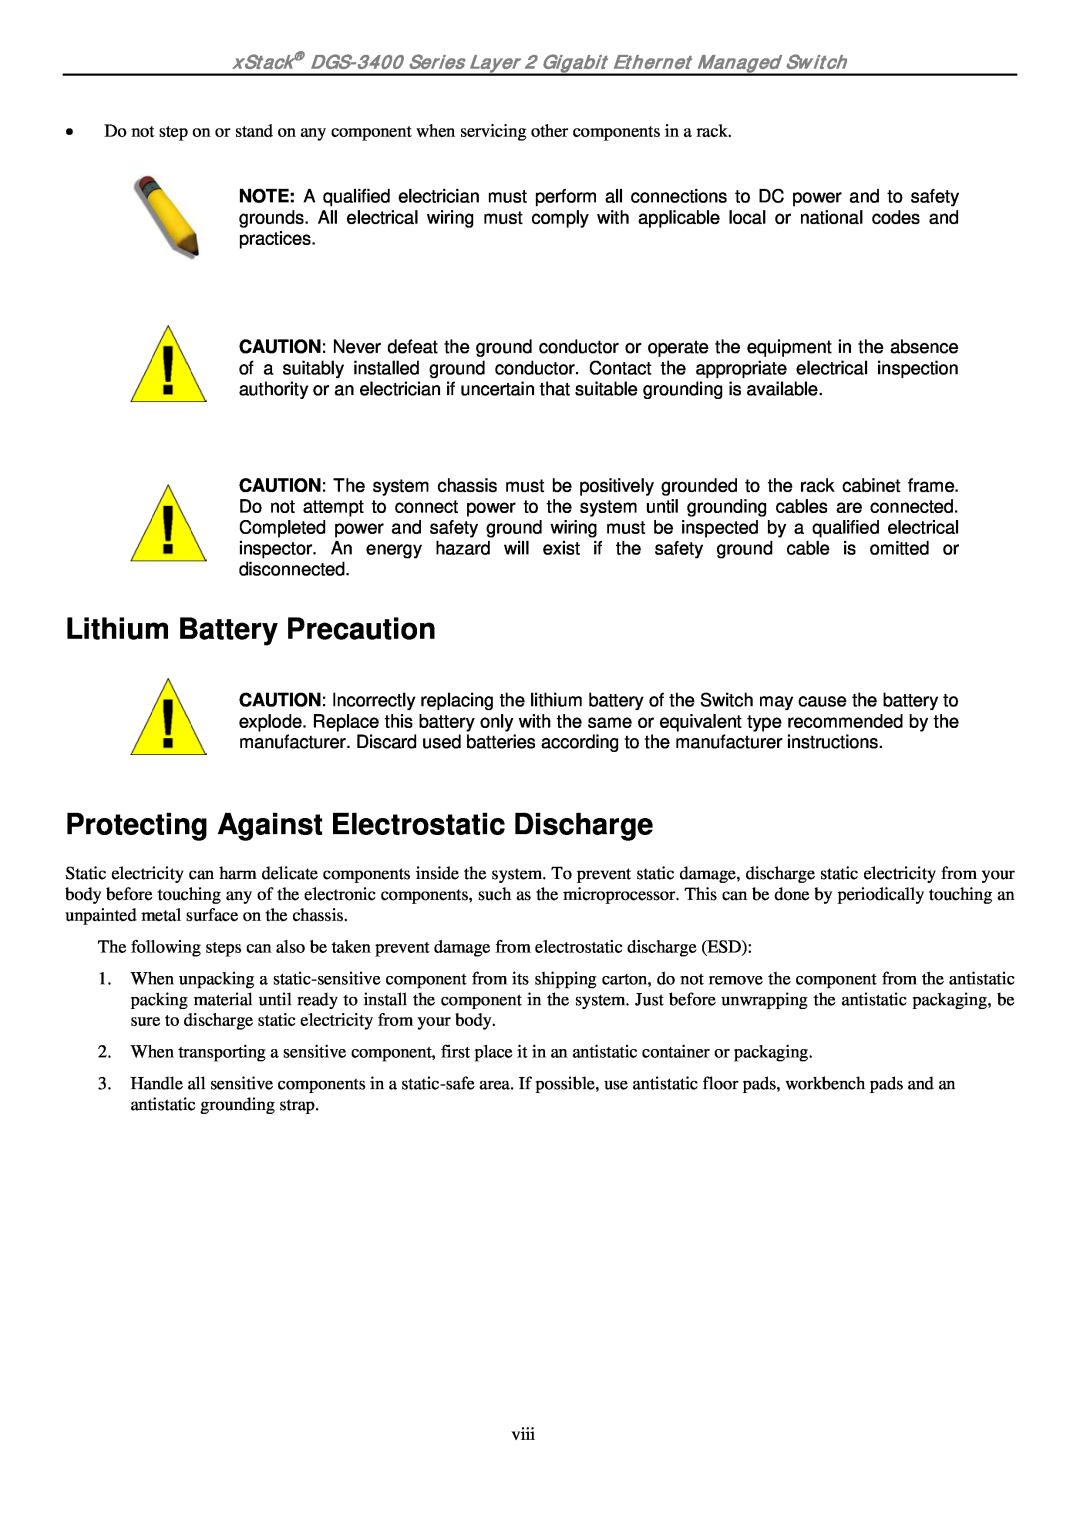 D-Link ethernet managed switch manual Lithium Battery Precaution, Protecting Against Electrostatic Discharge 